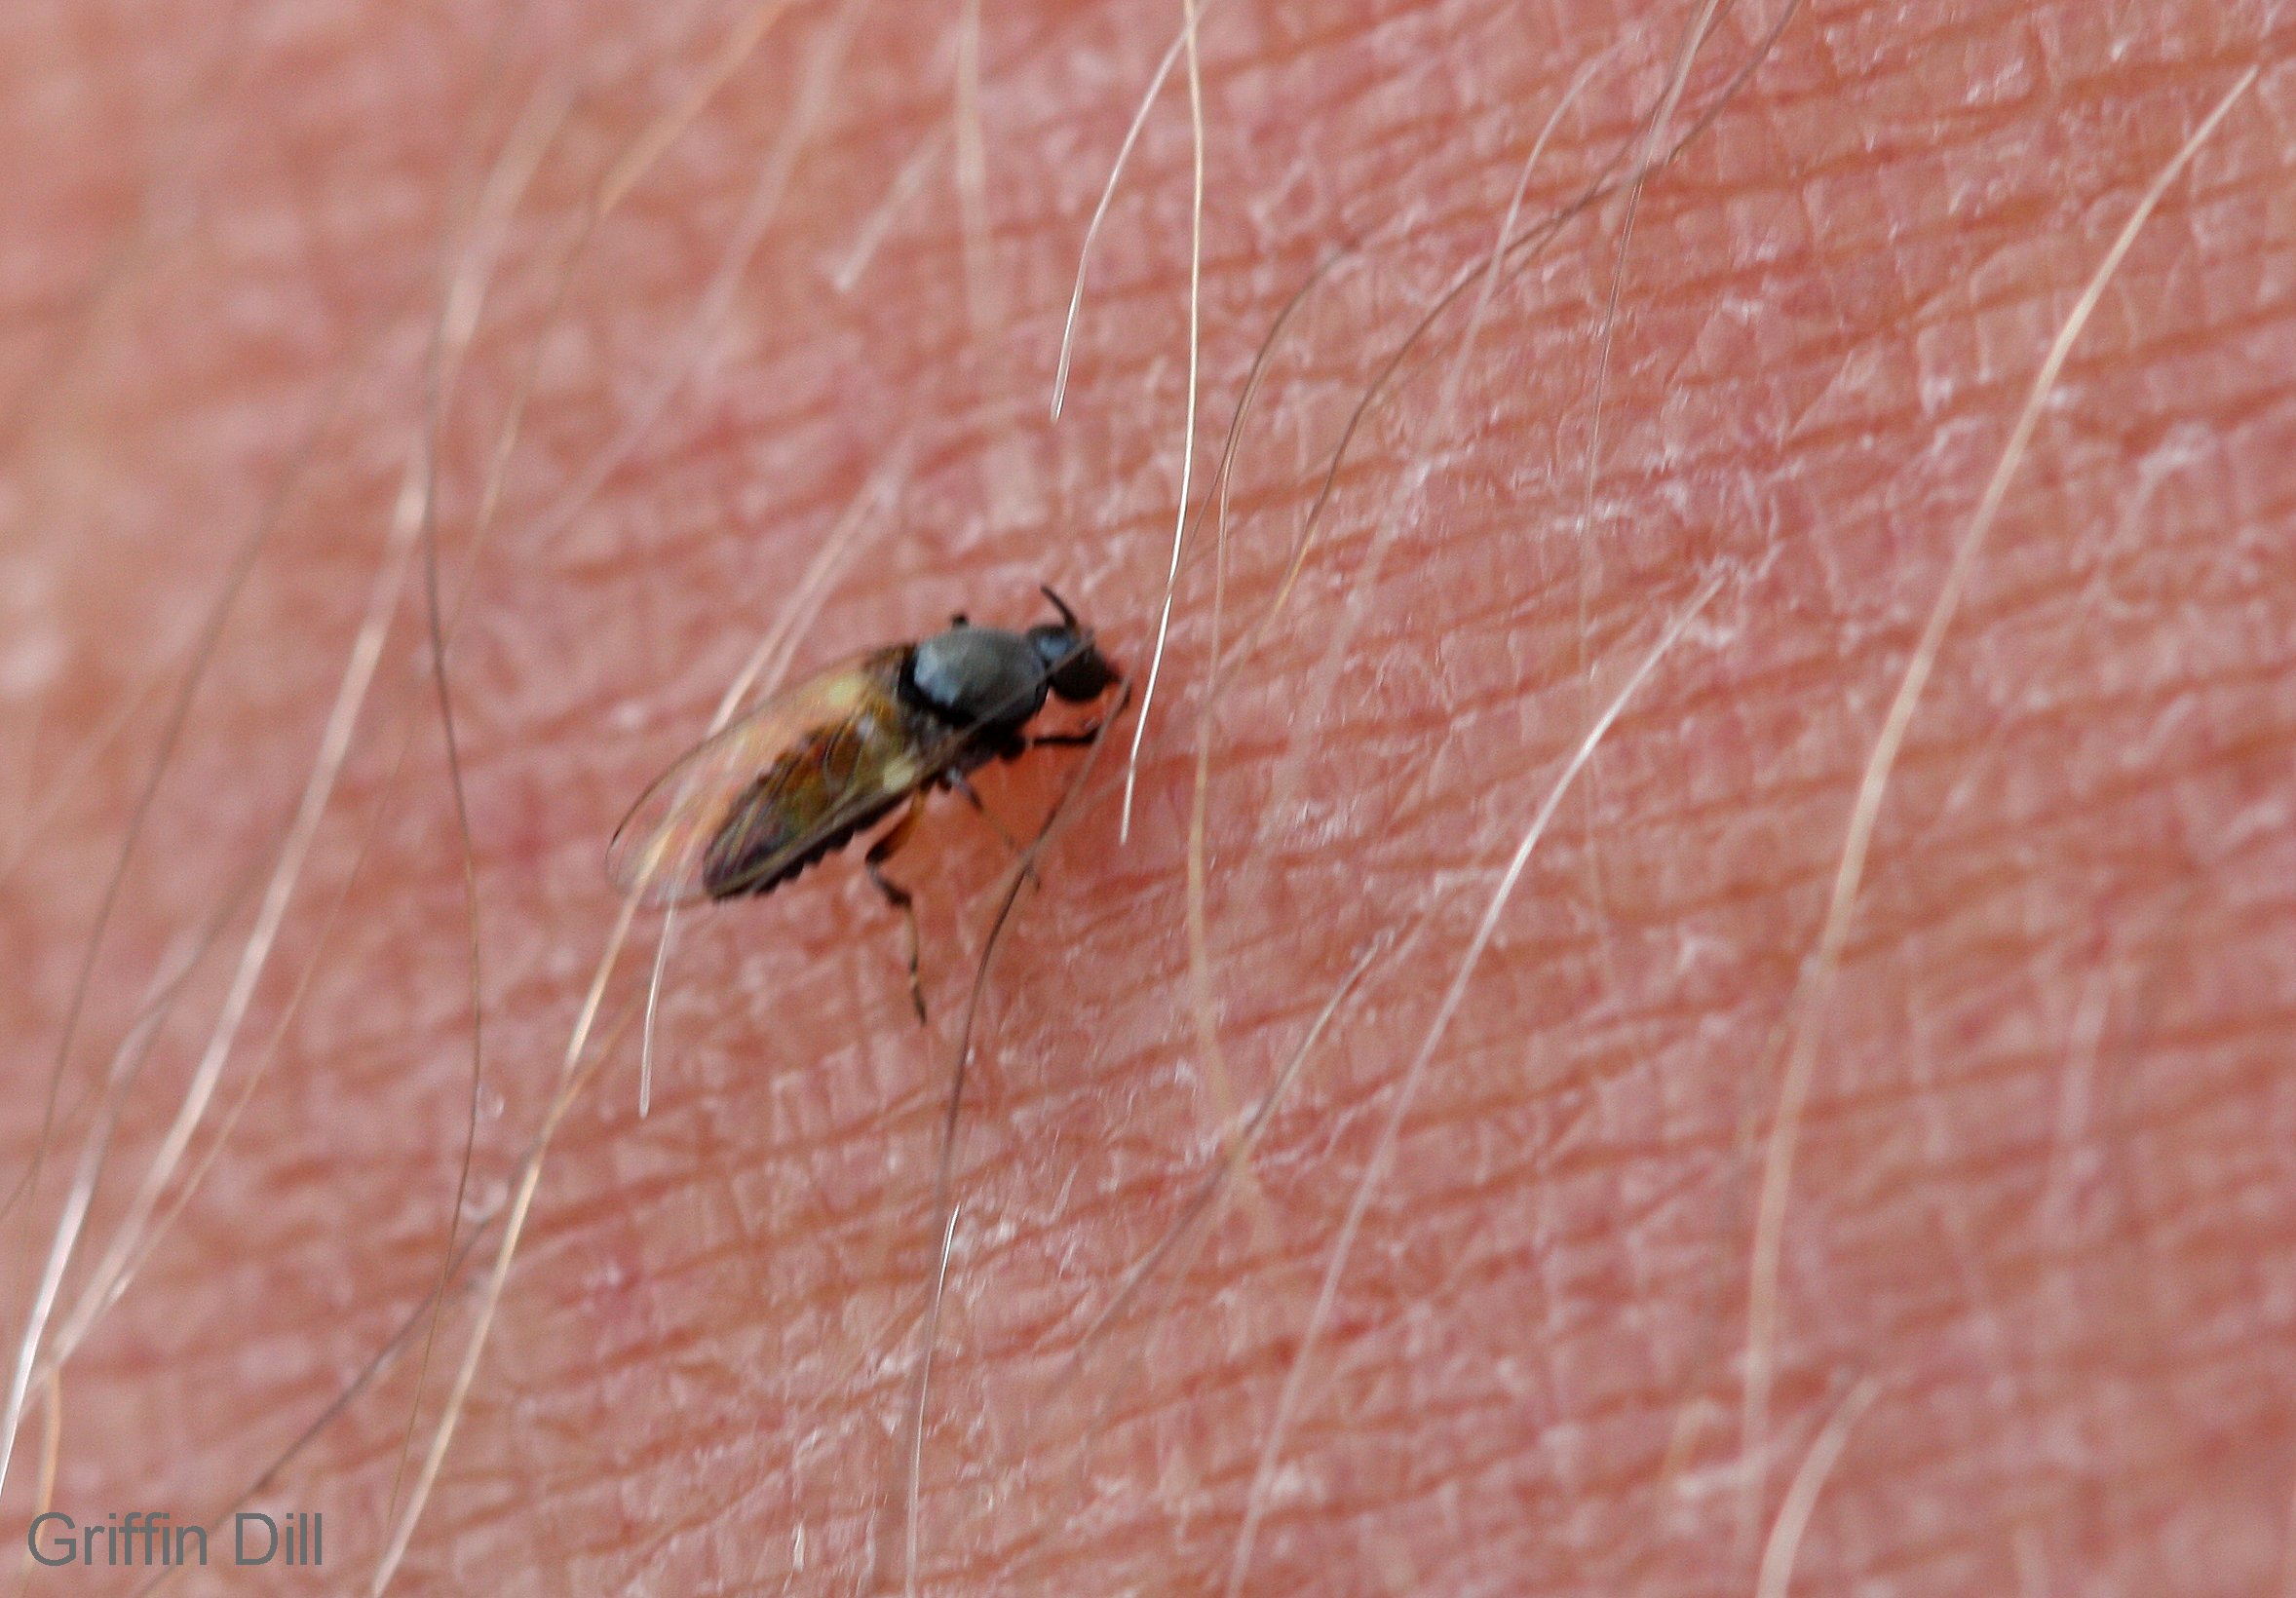 4 little-known facts about black flies that may make you hate them a